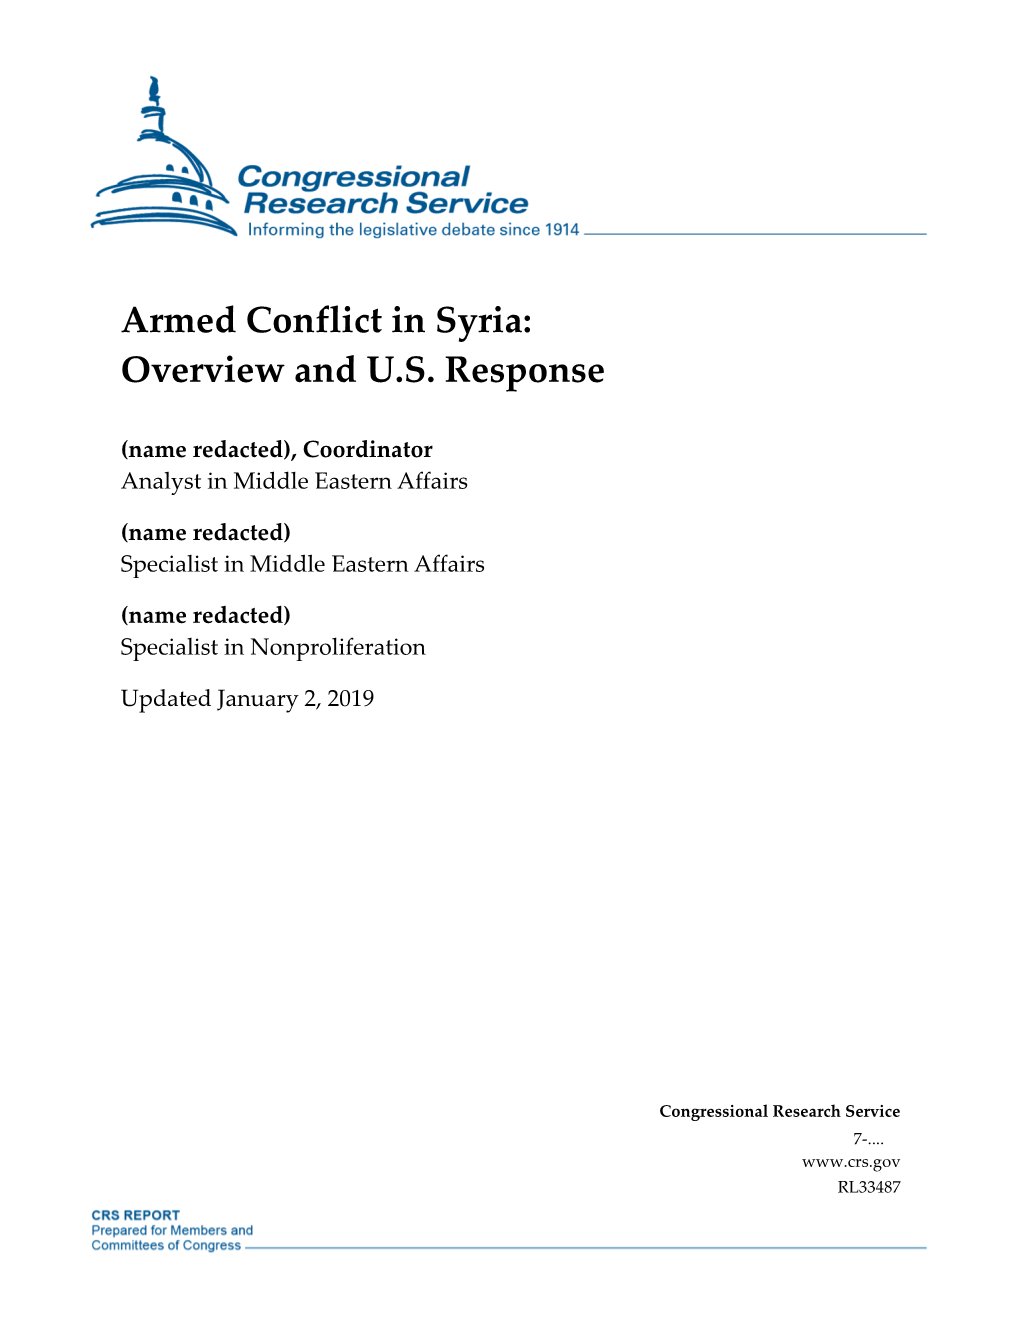 Armed Conflict in Syria: Overview and US Response